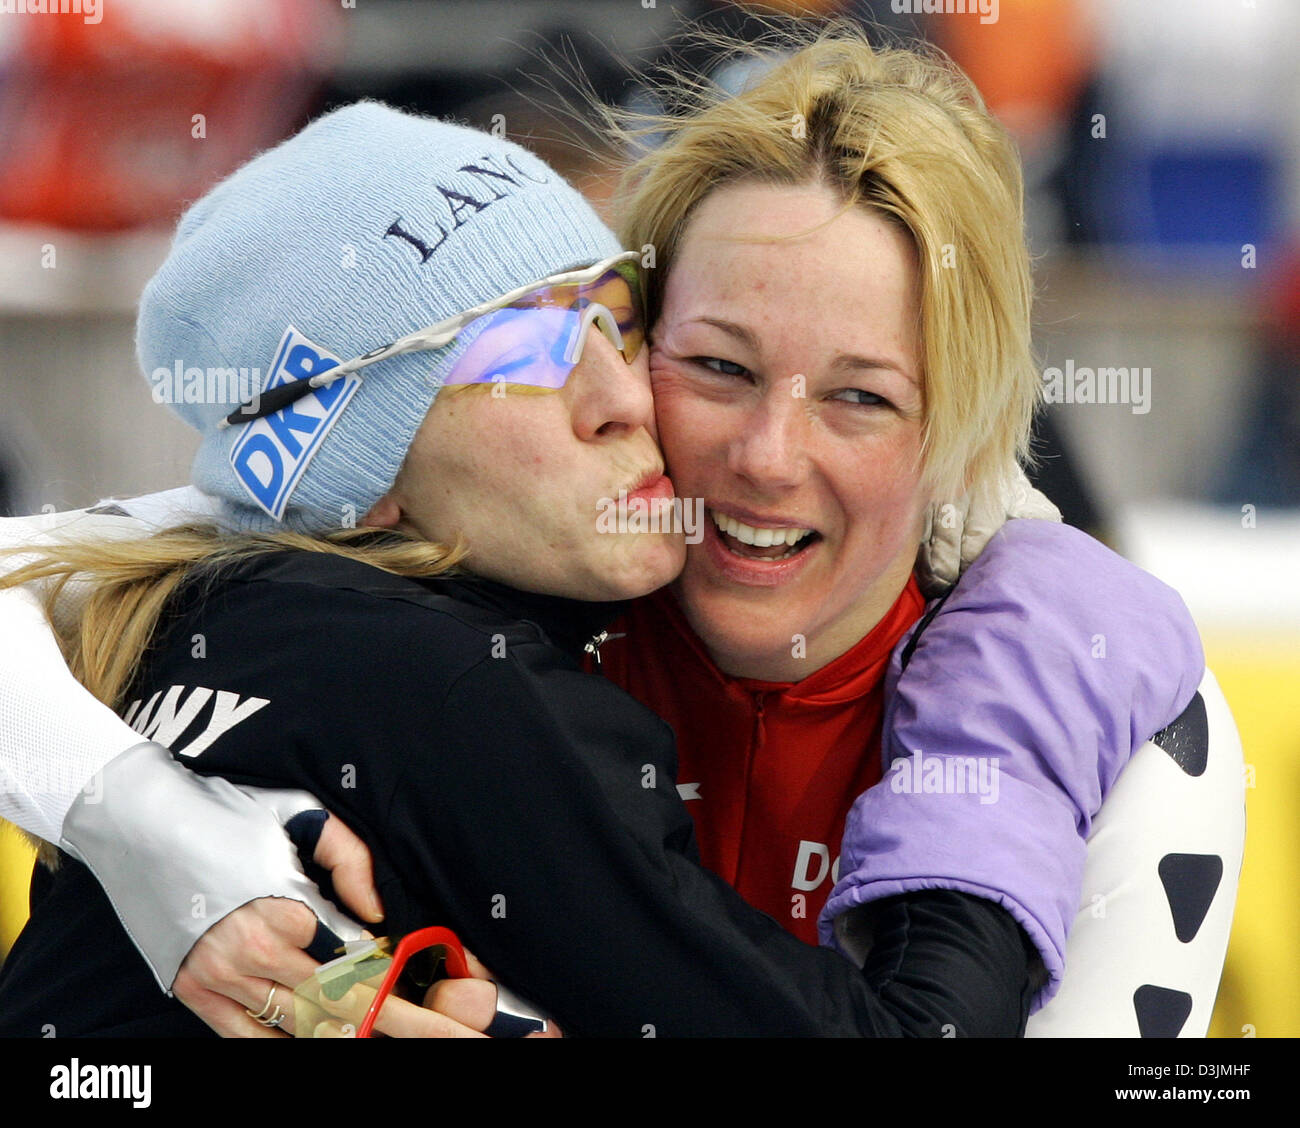 (dpa) - German speed skater Anni Friesinger (L) and Dutch speed skater Marianne Timmer congratulate themselves after finishing in second and third place respectively in the Women's 1000 meter race at the Speed Skating World Championship in Inzell, Germany, 6 March 2005. Stock Photo